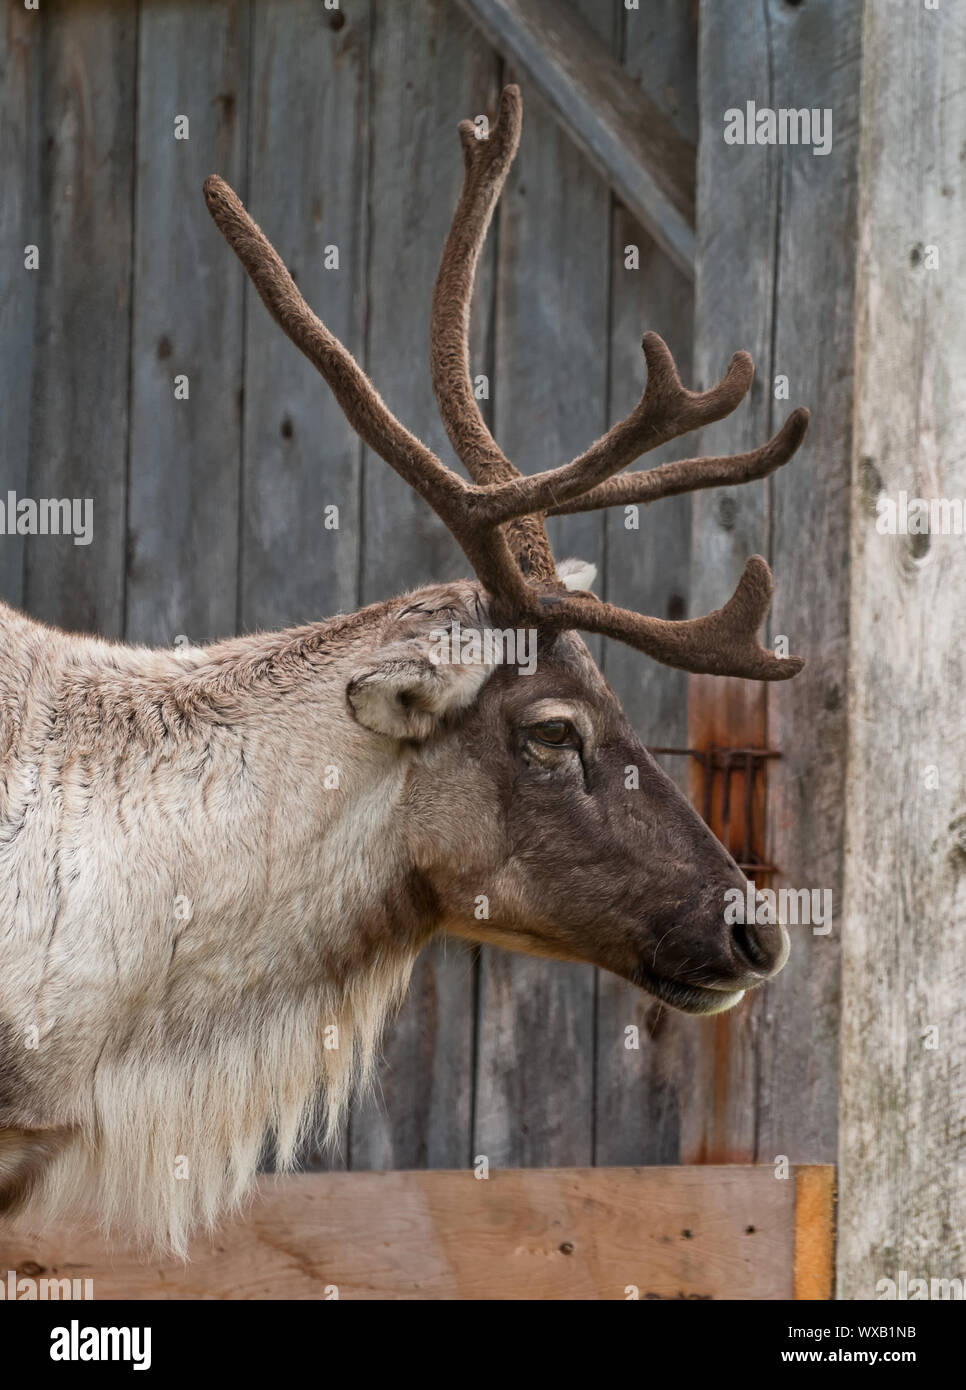 Caribou head with nice antler, close up a Stock Photo